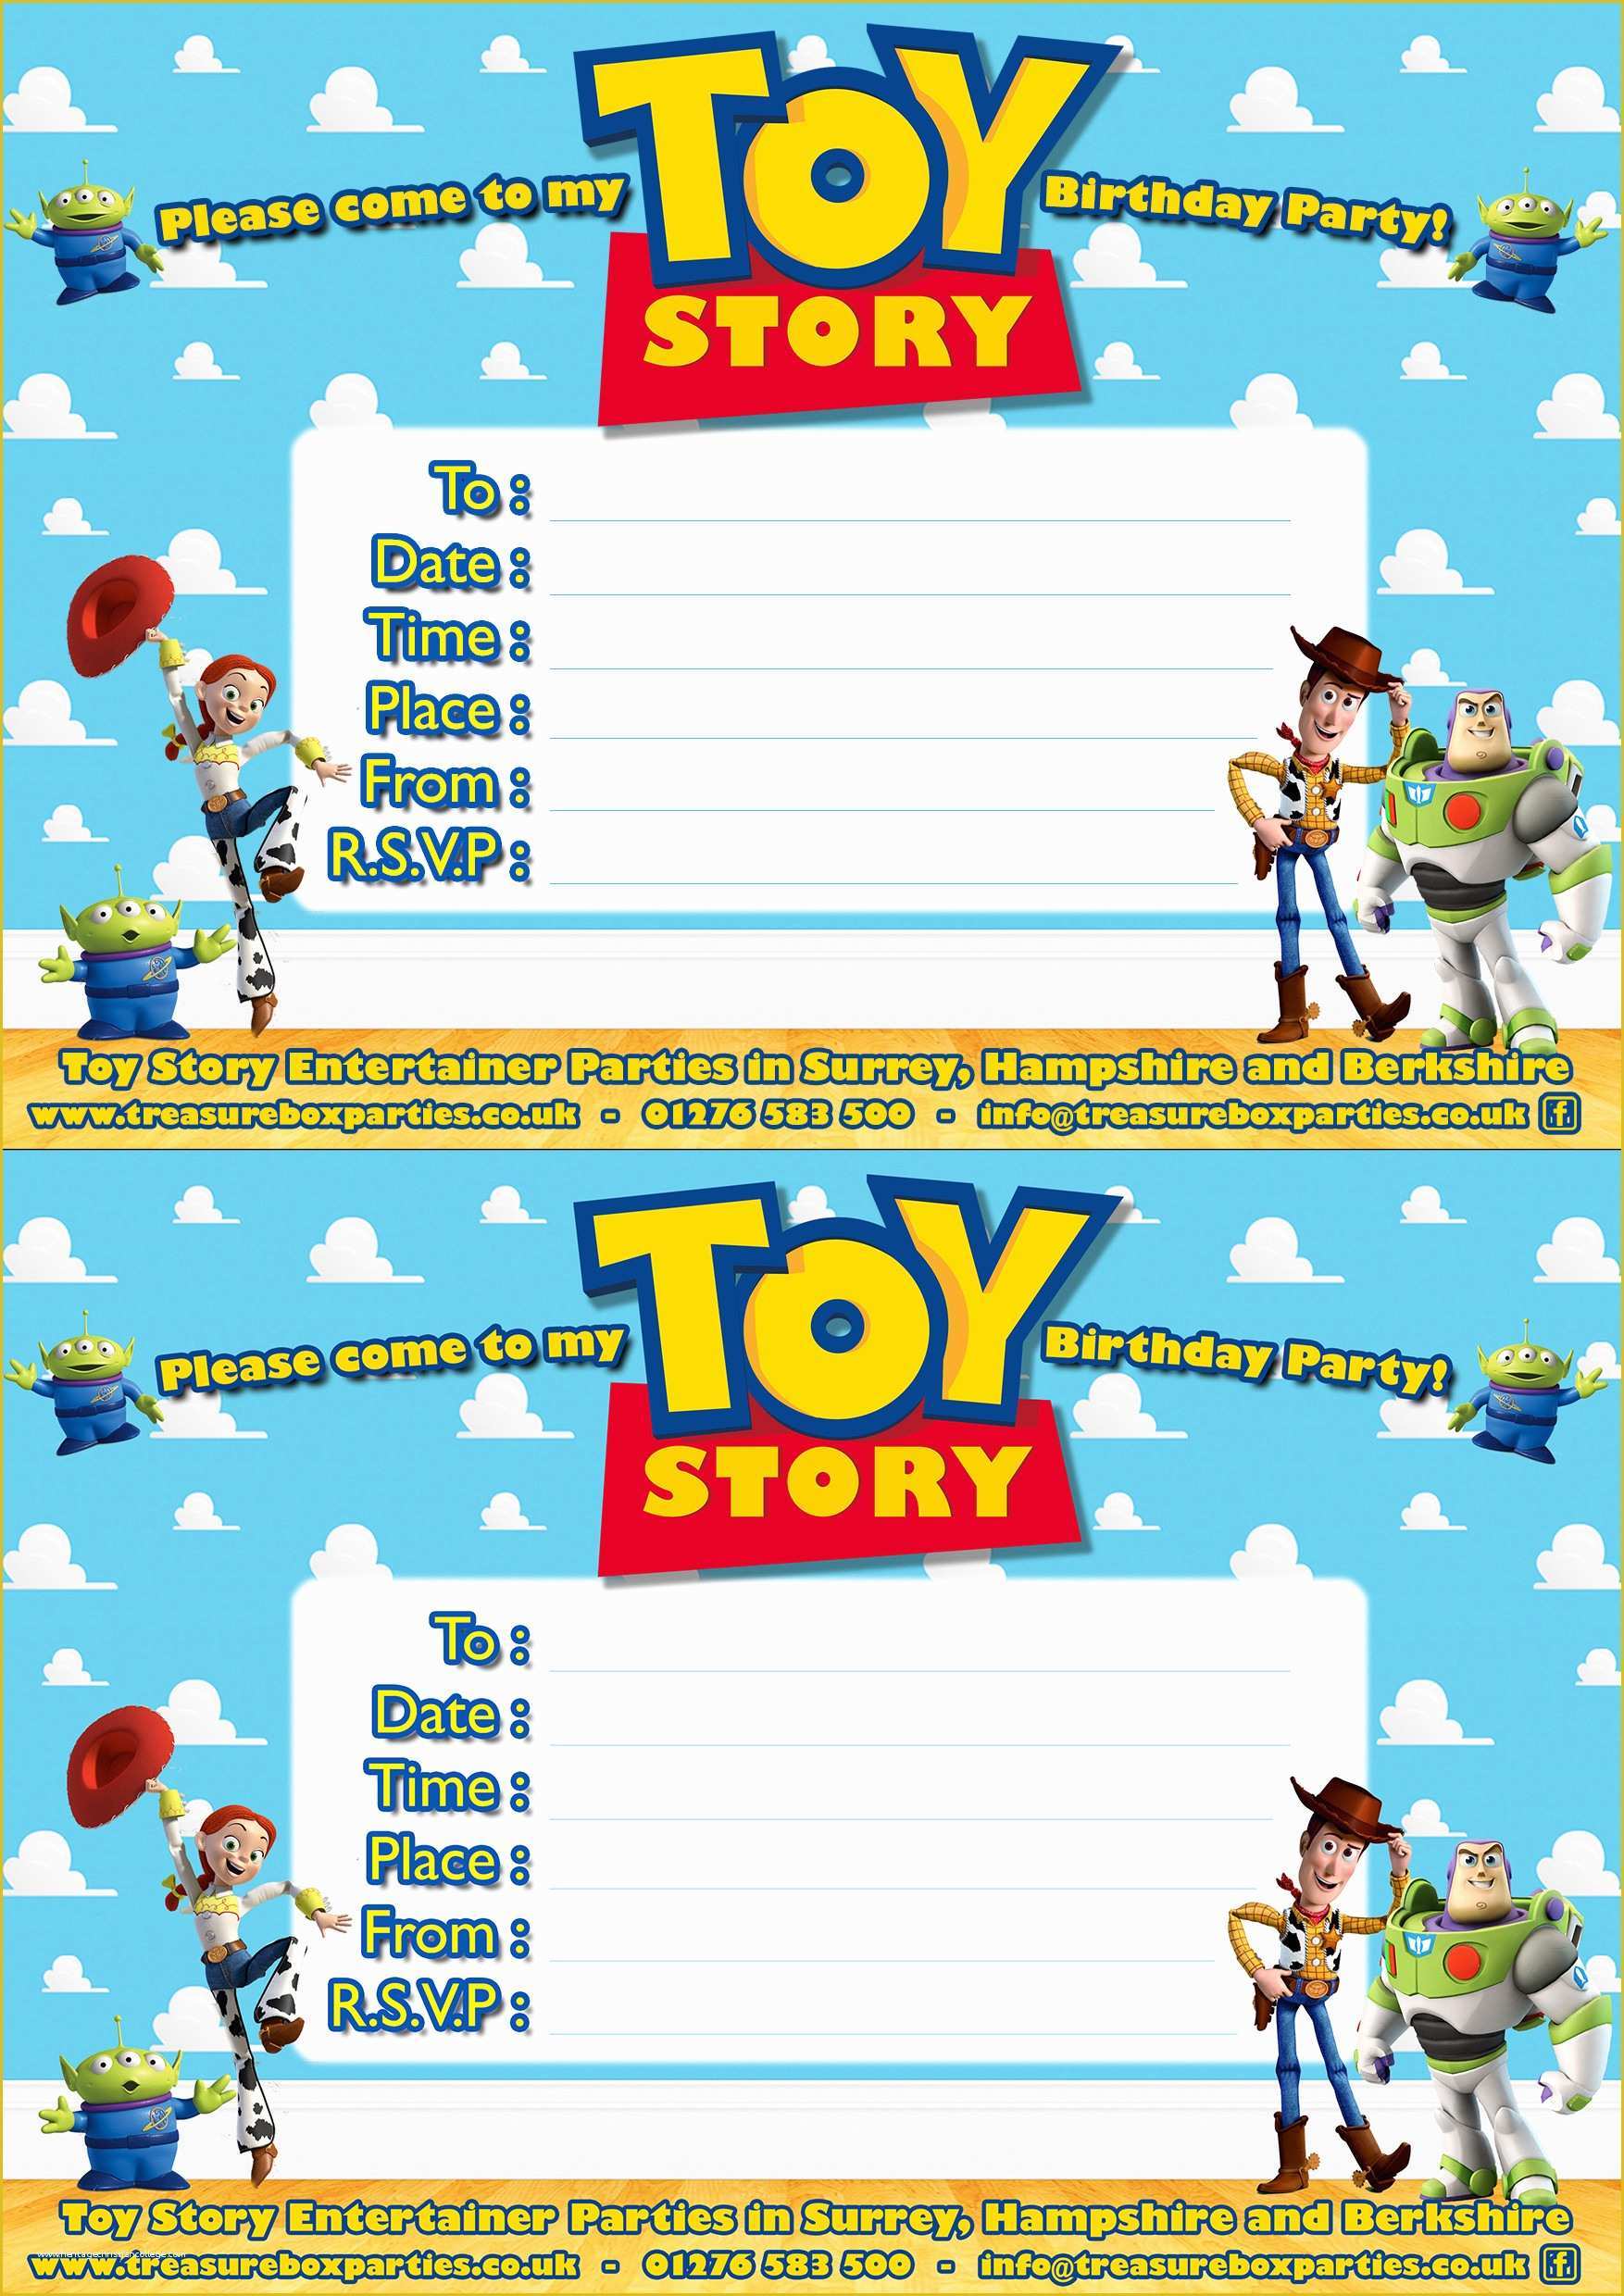 Toy Story Invitation Template Free Download Of toy Story Invitation Template Free Download Reference